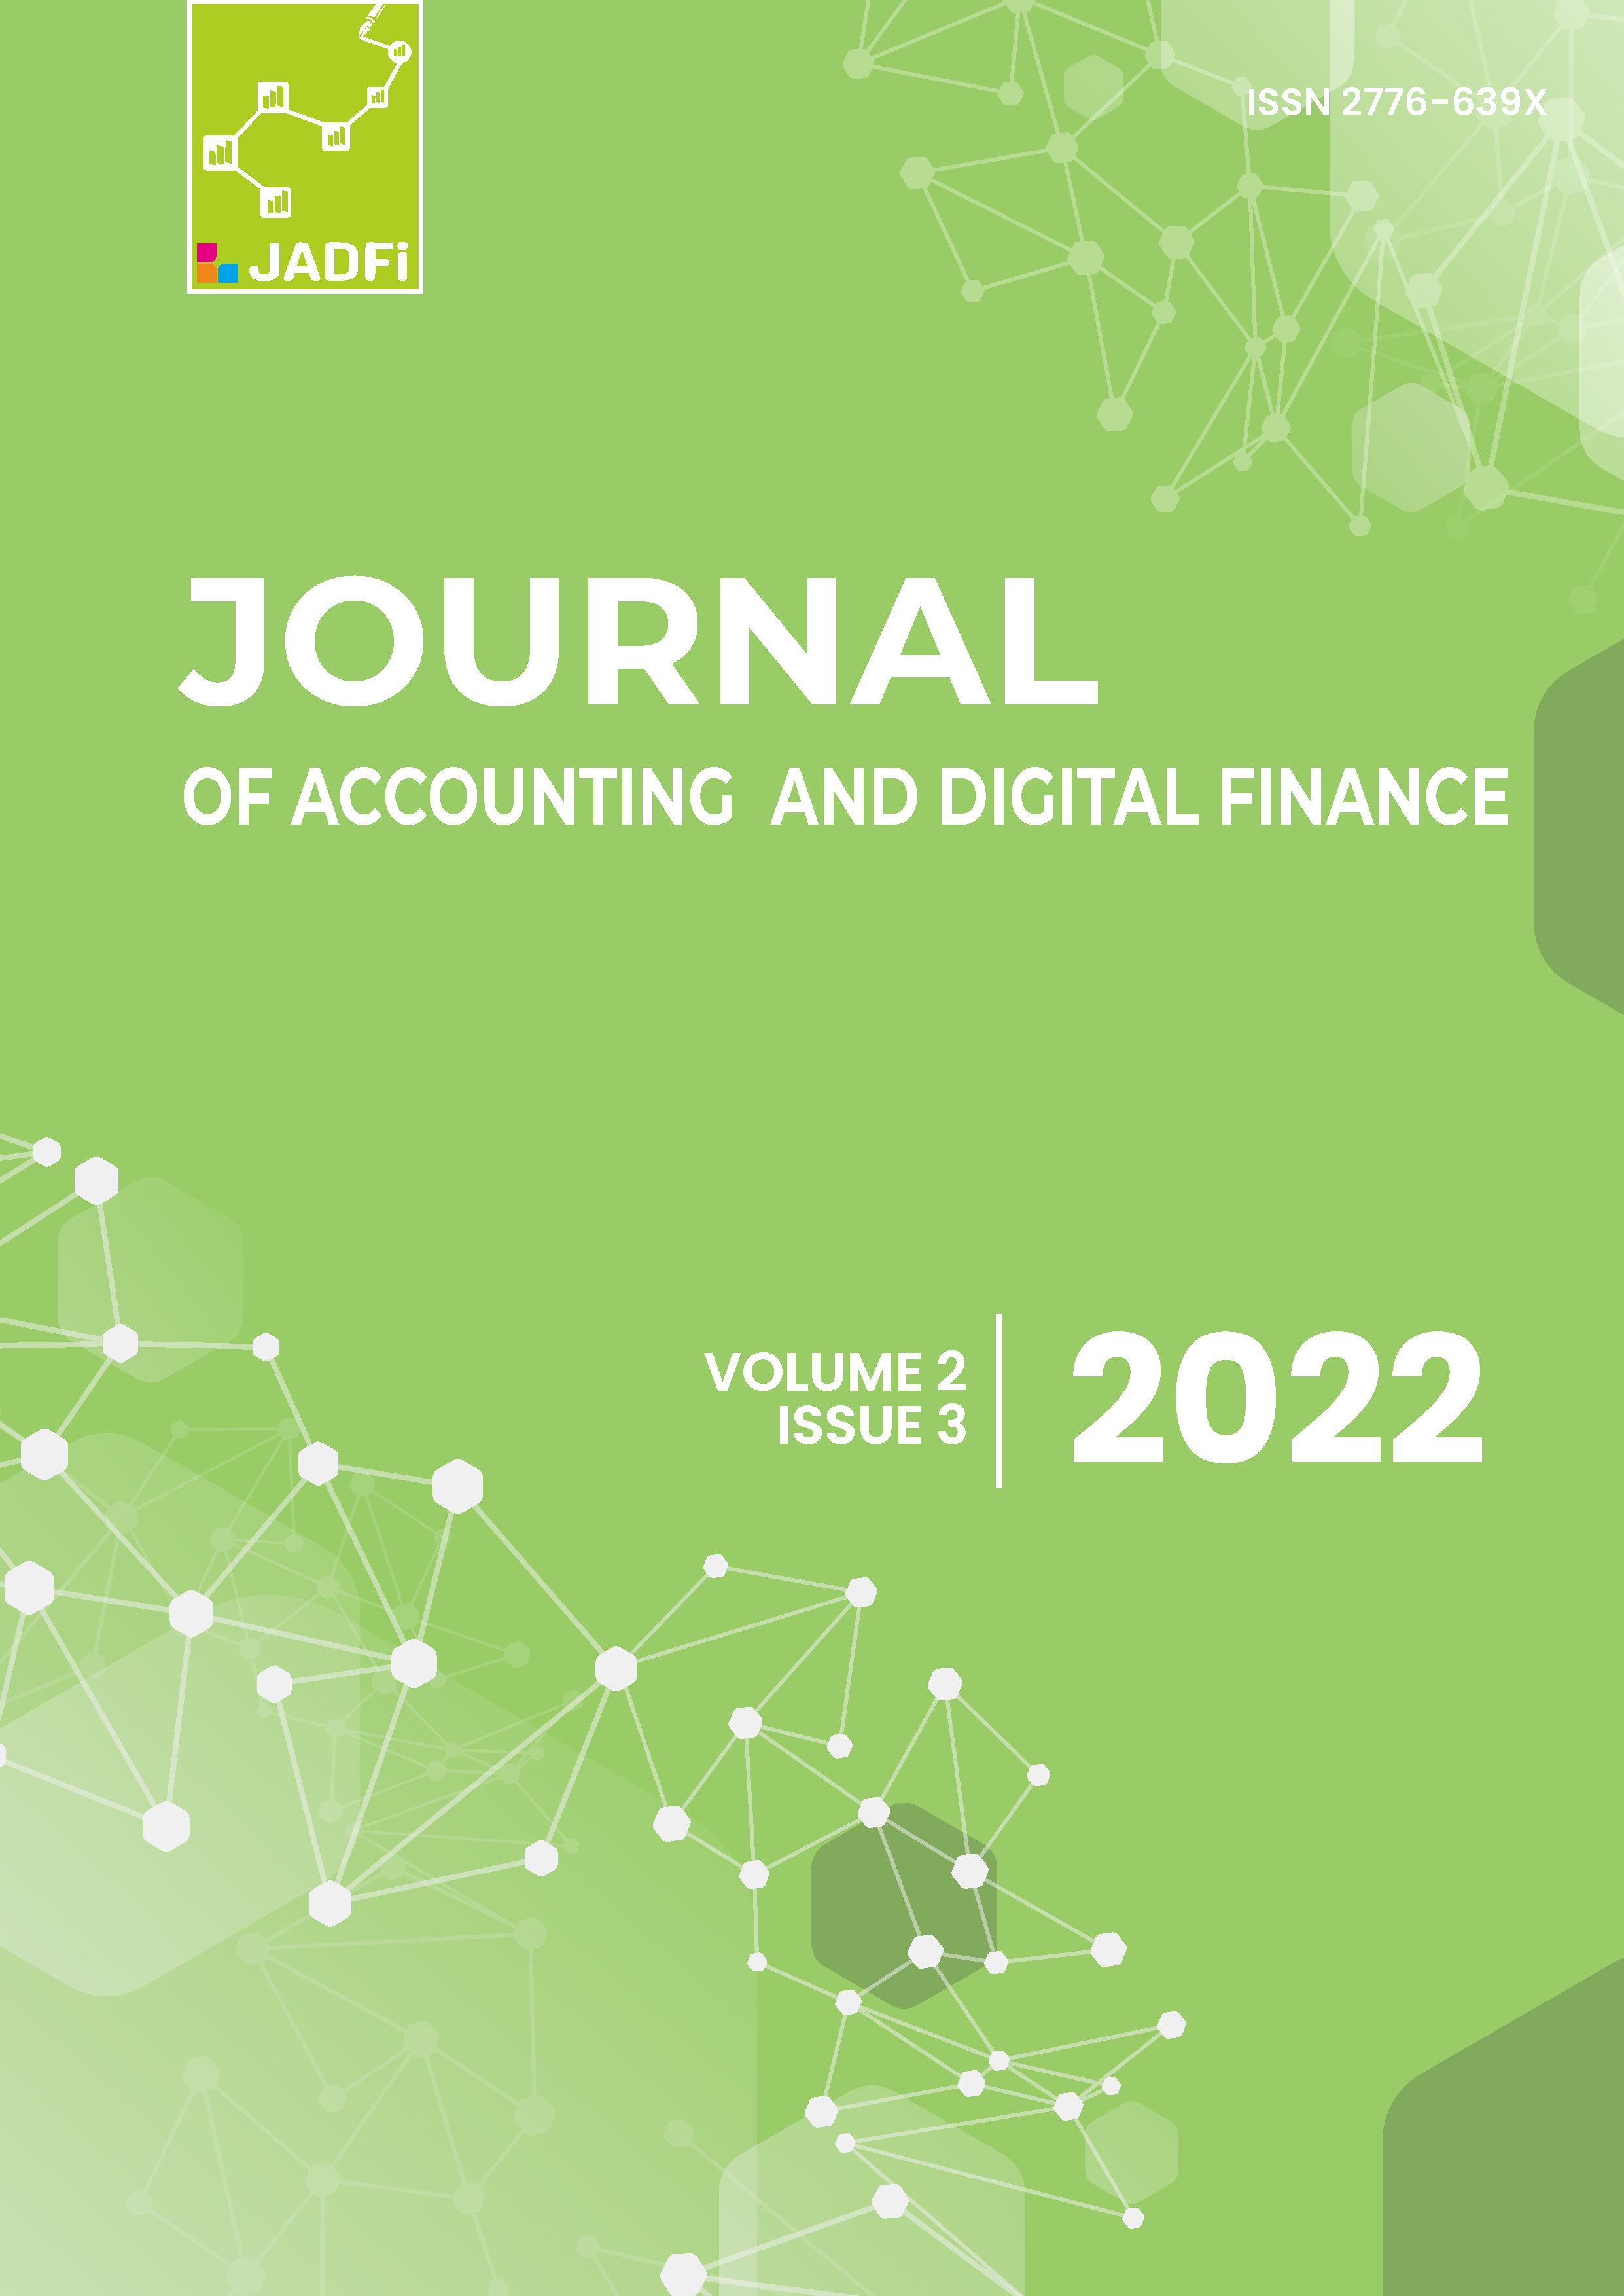 					View Vol. 2 No. 3 (2022): Journal of Accounting and Digital Finance
				